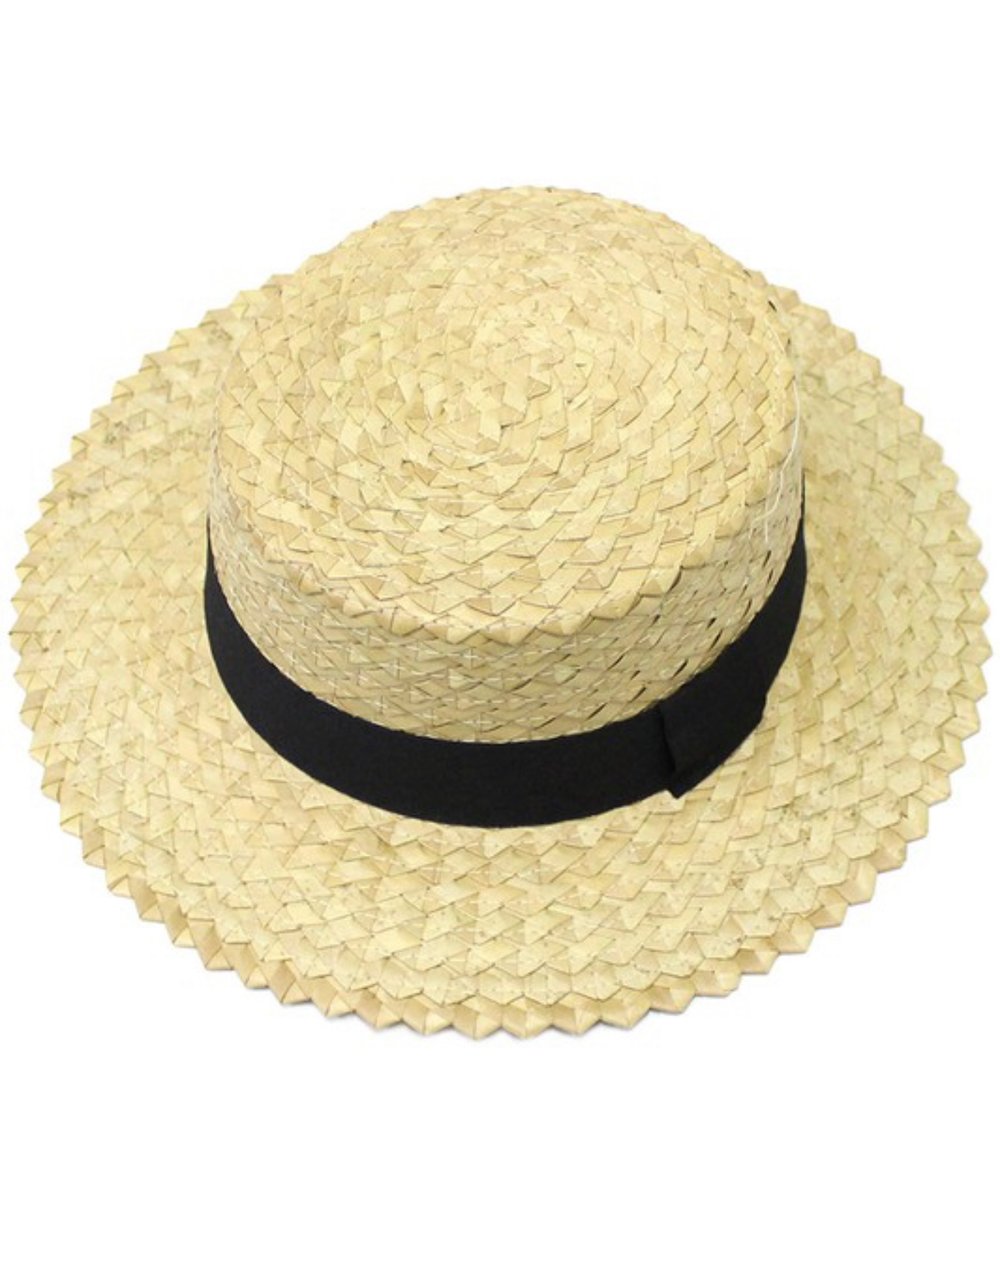 Image of Natural Woven Straw Sunhat 